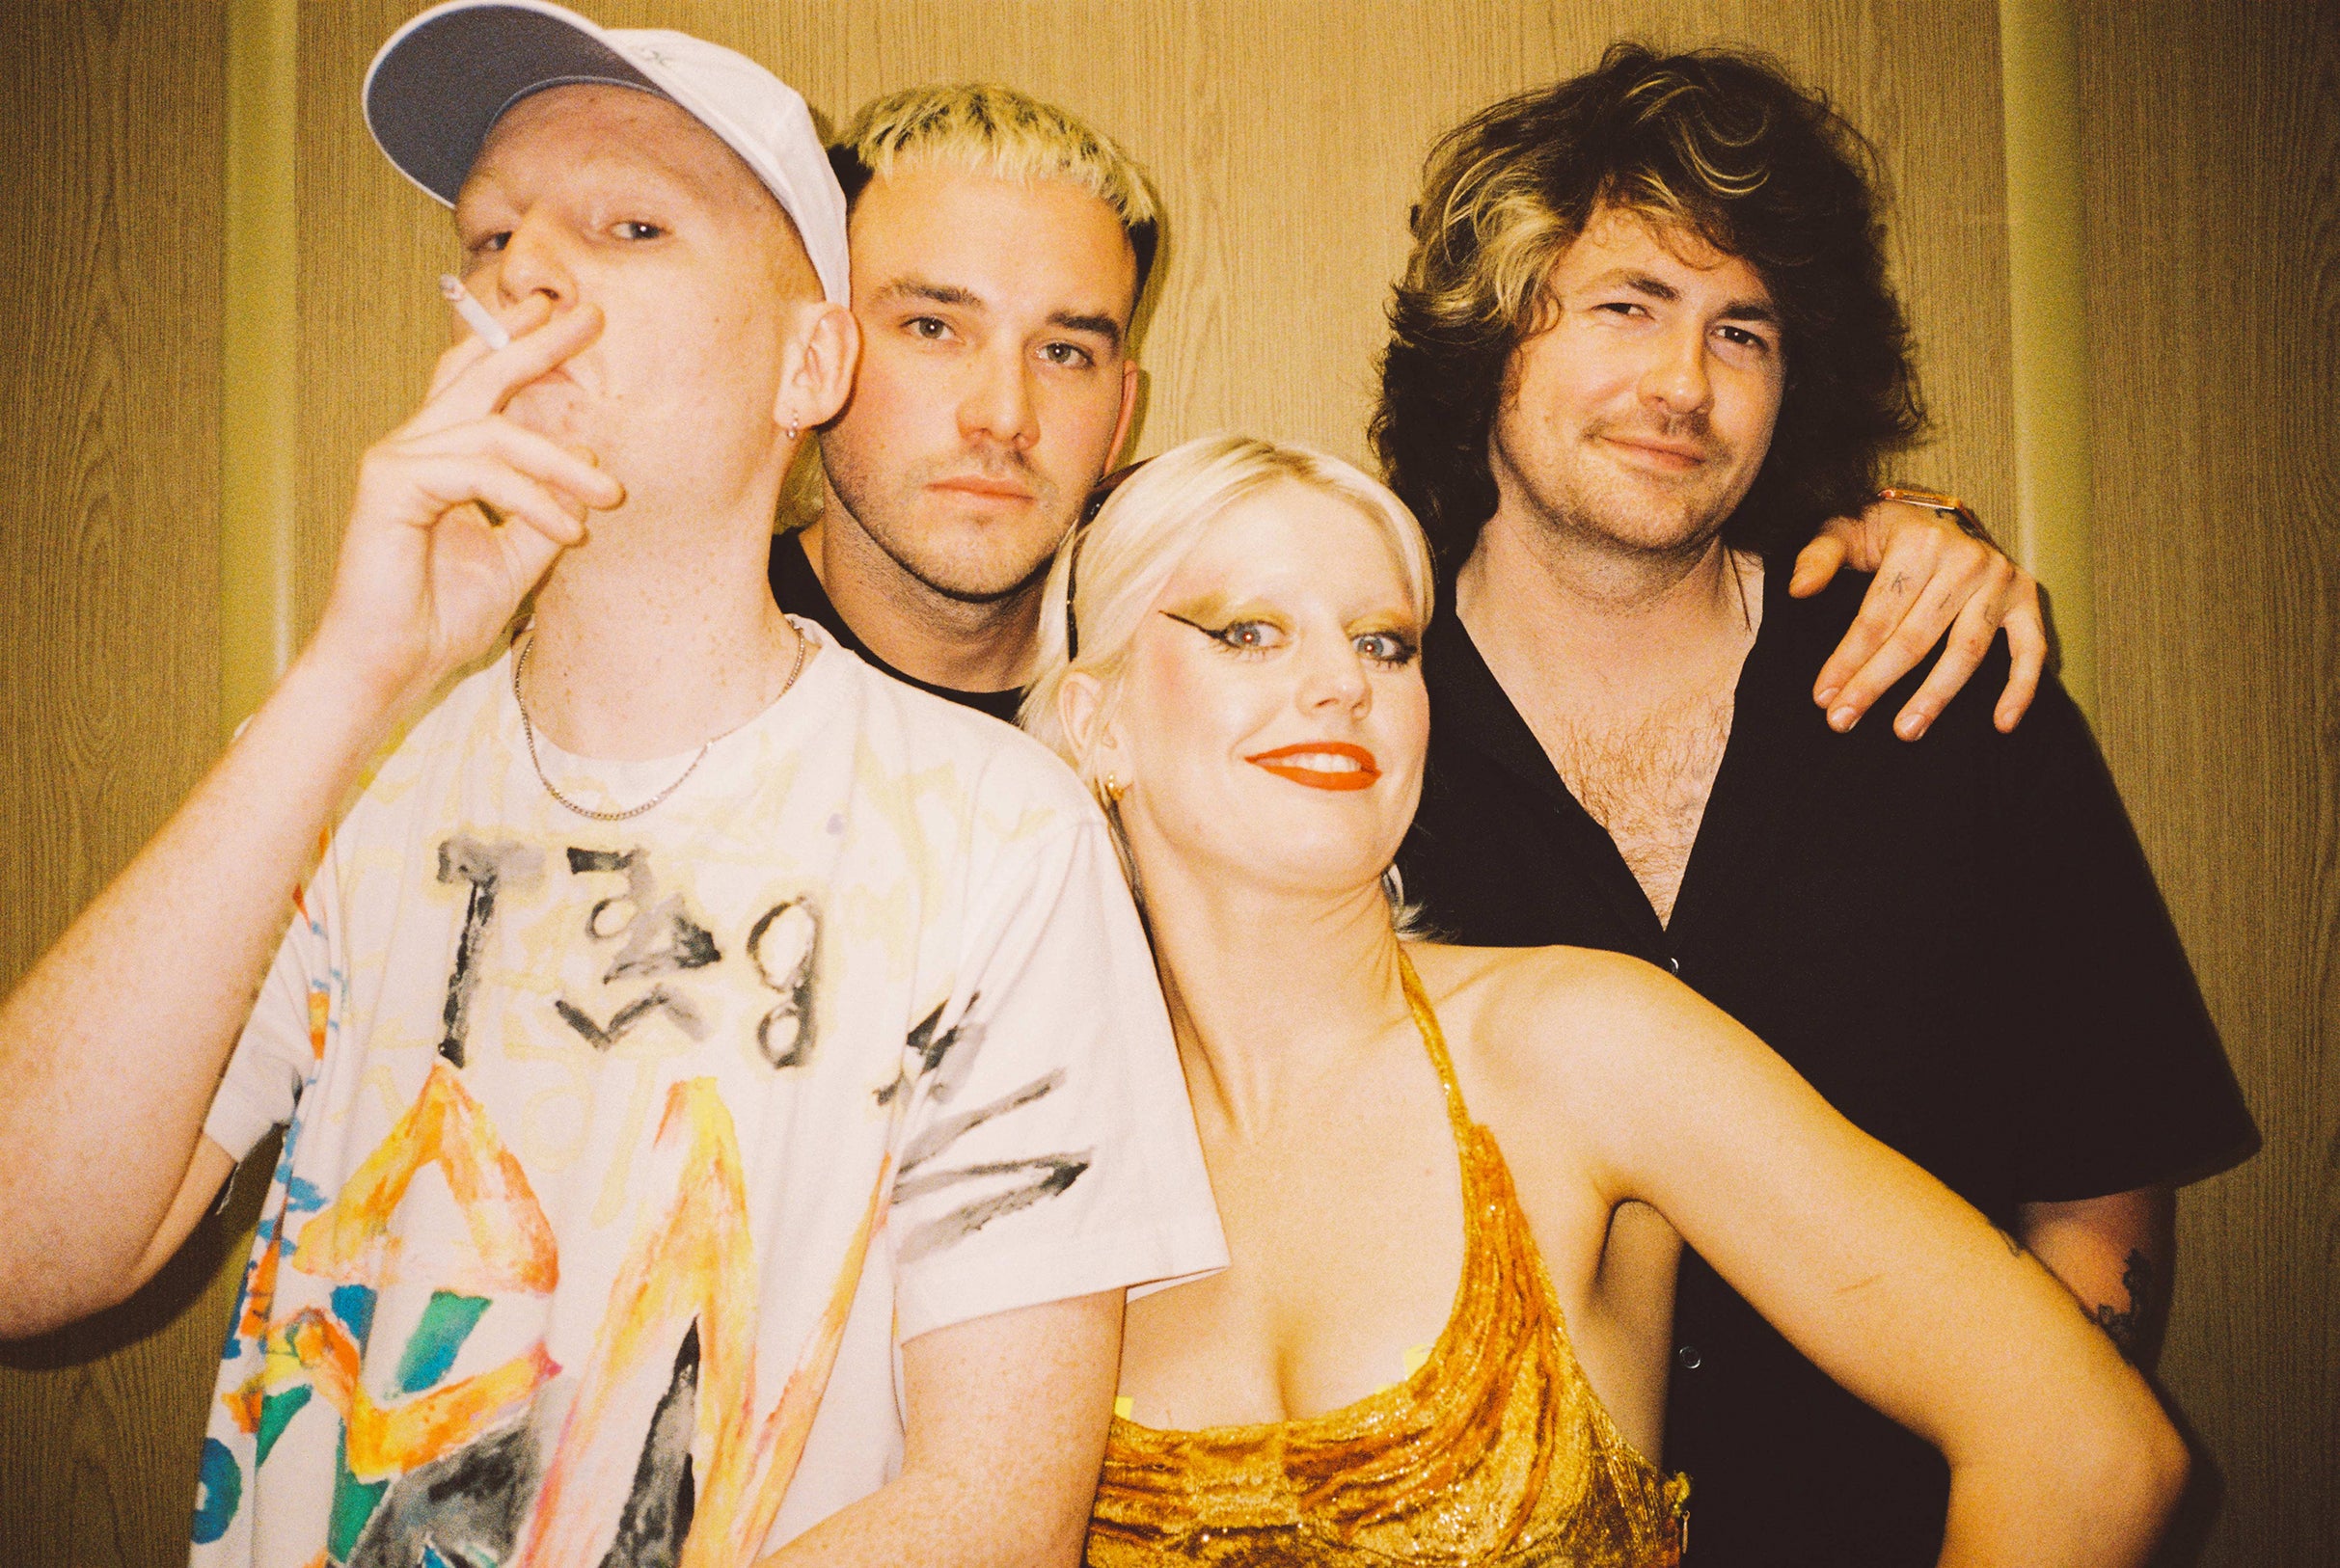 new presale passcode for Amyl and the Sniffers tickets in Del Mar